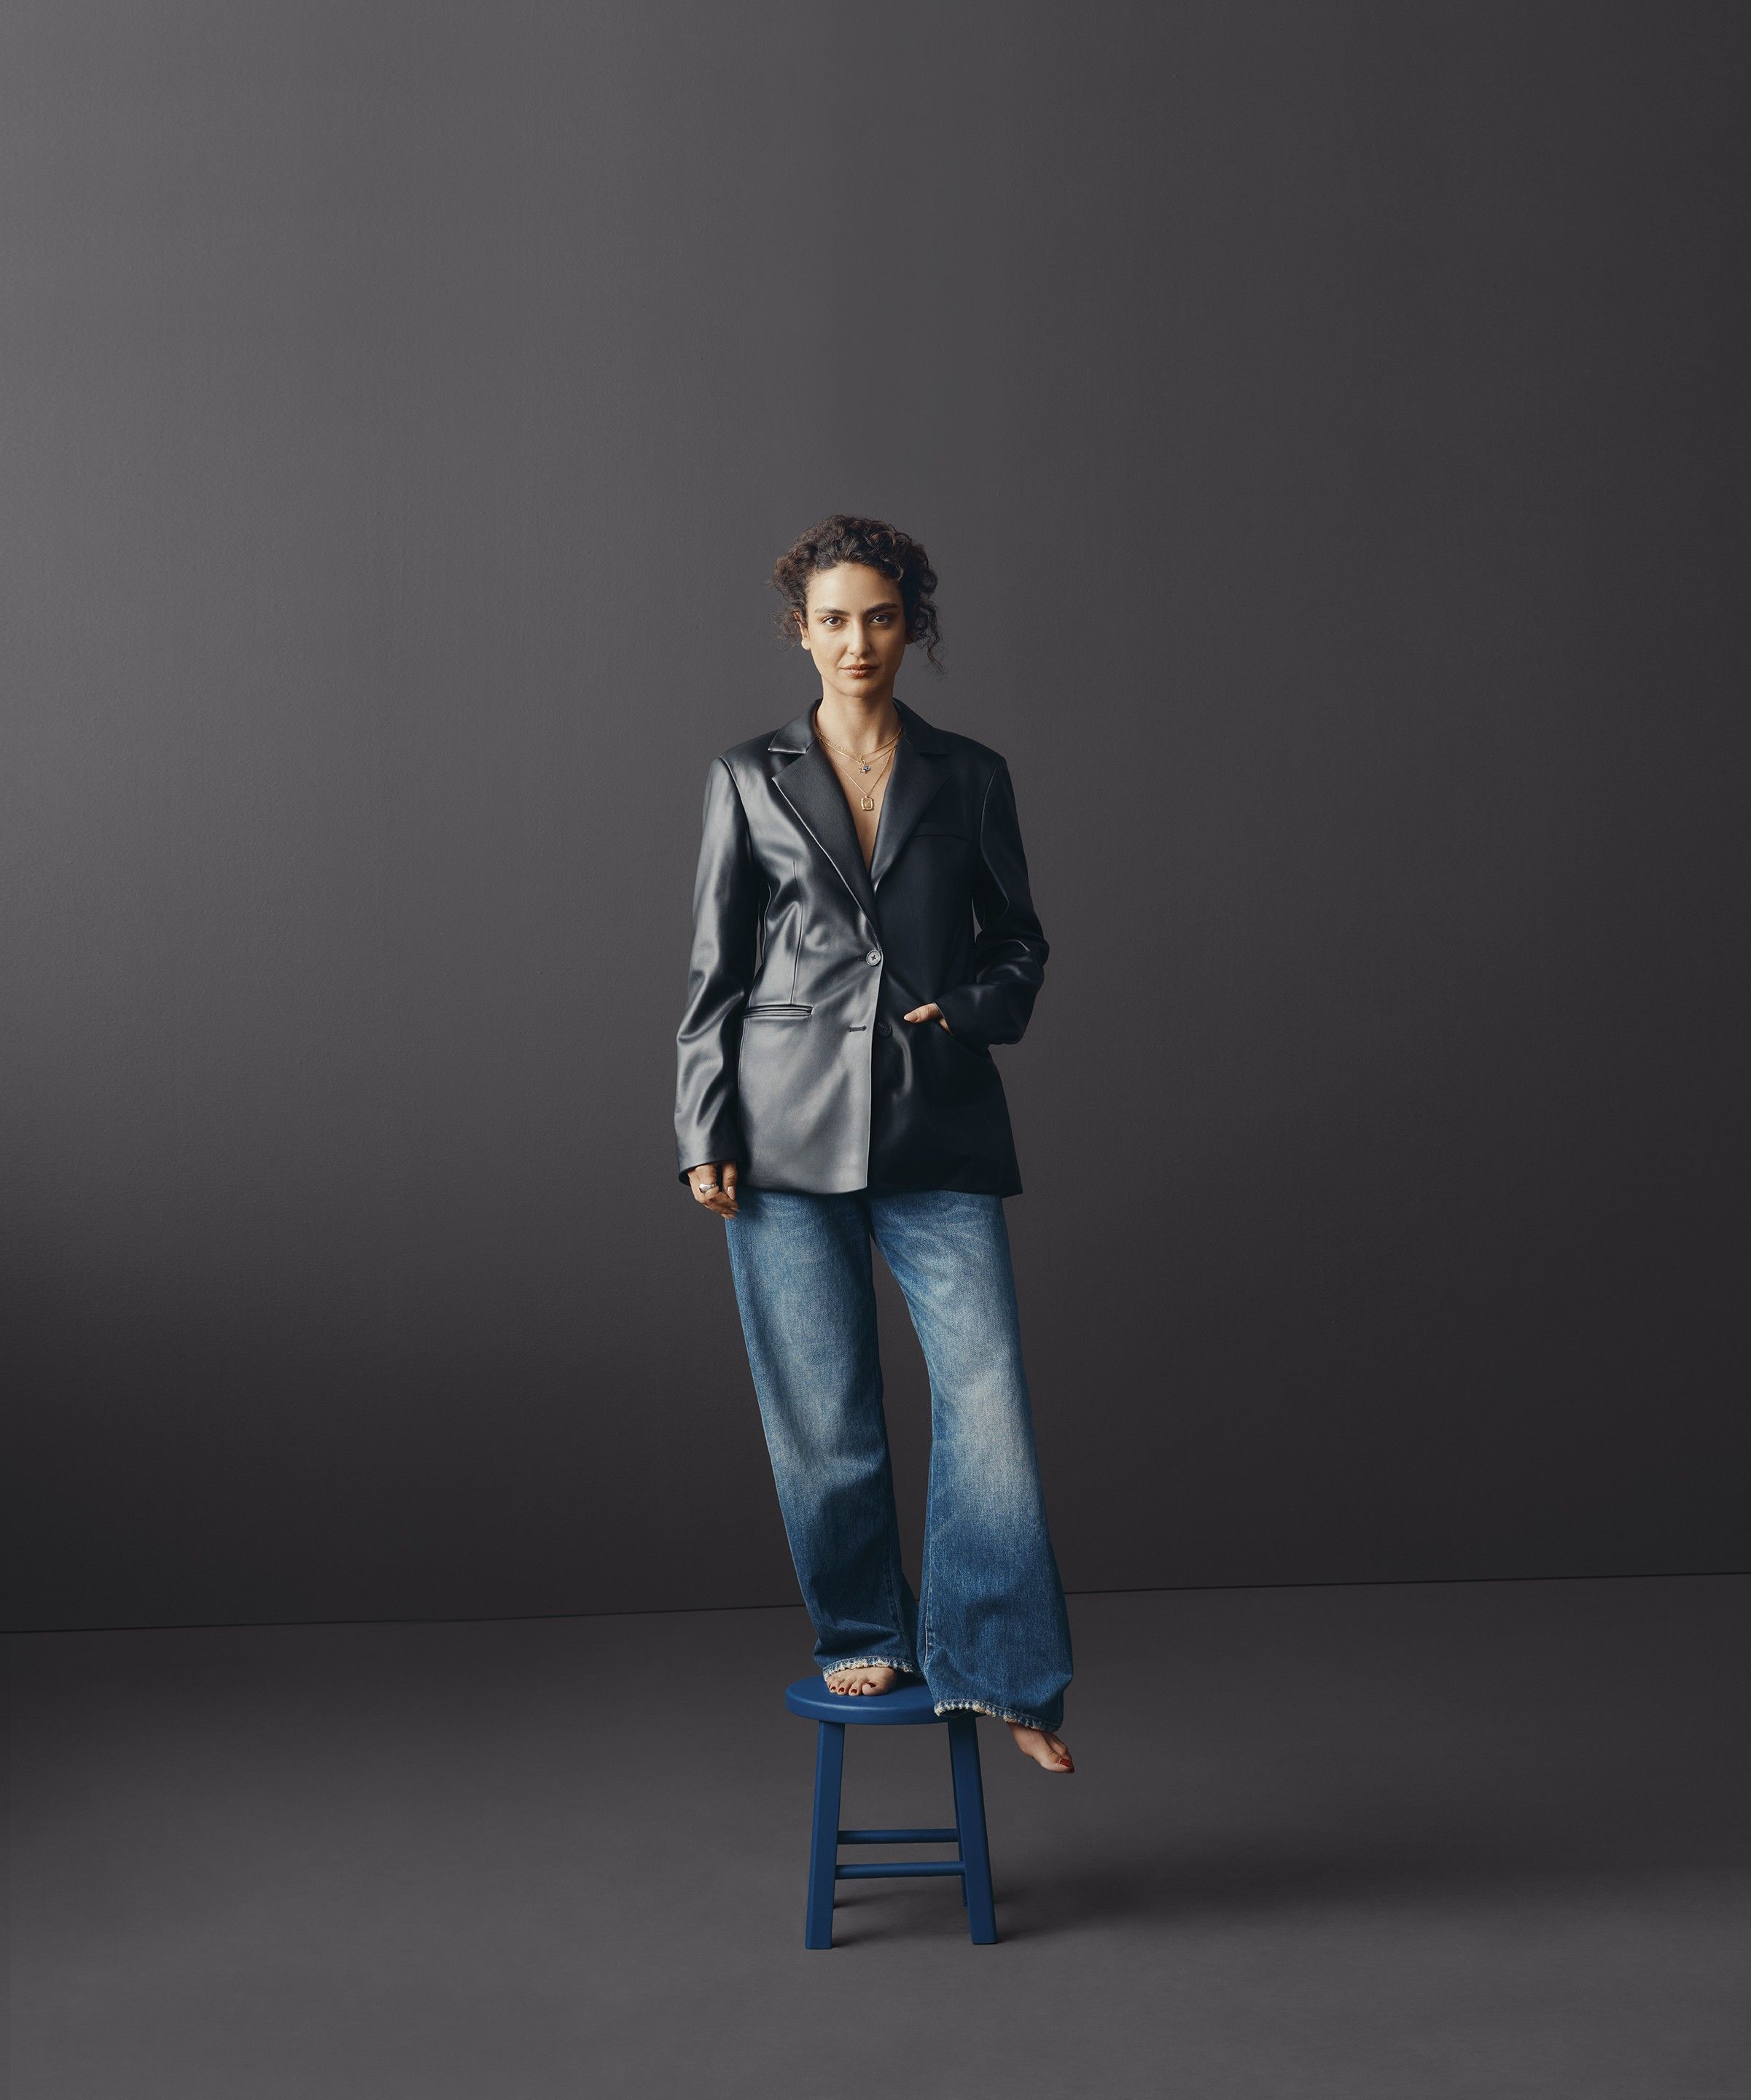 New Gap Fall Fashion Line And Celebrity Campaign For    Brit + Co